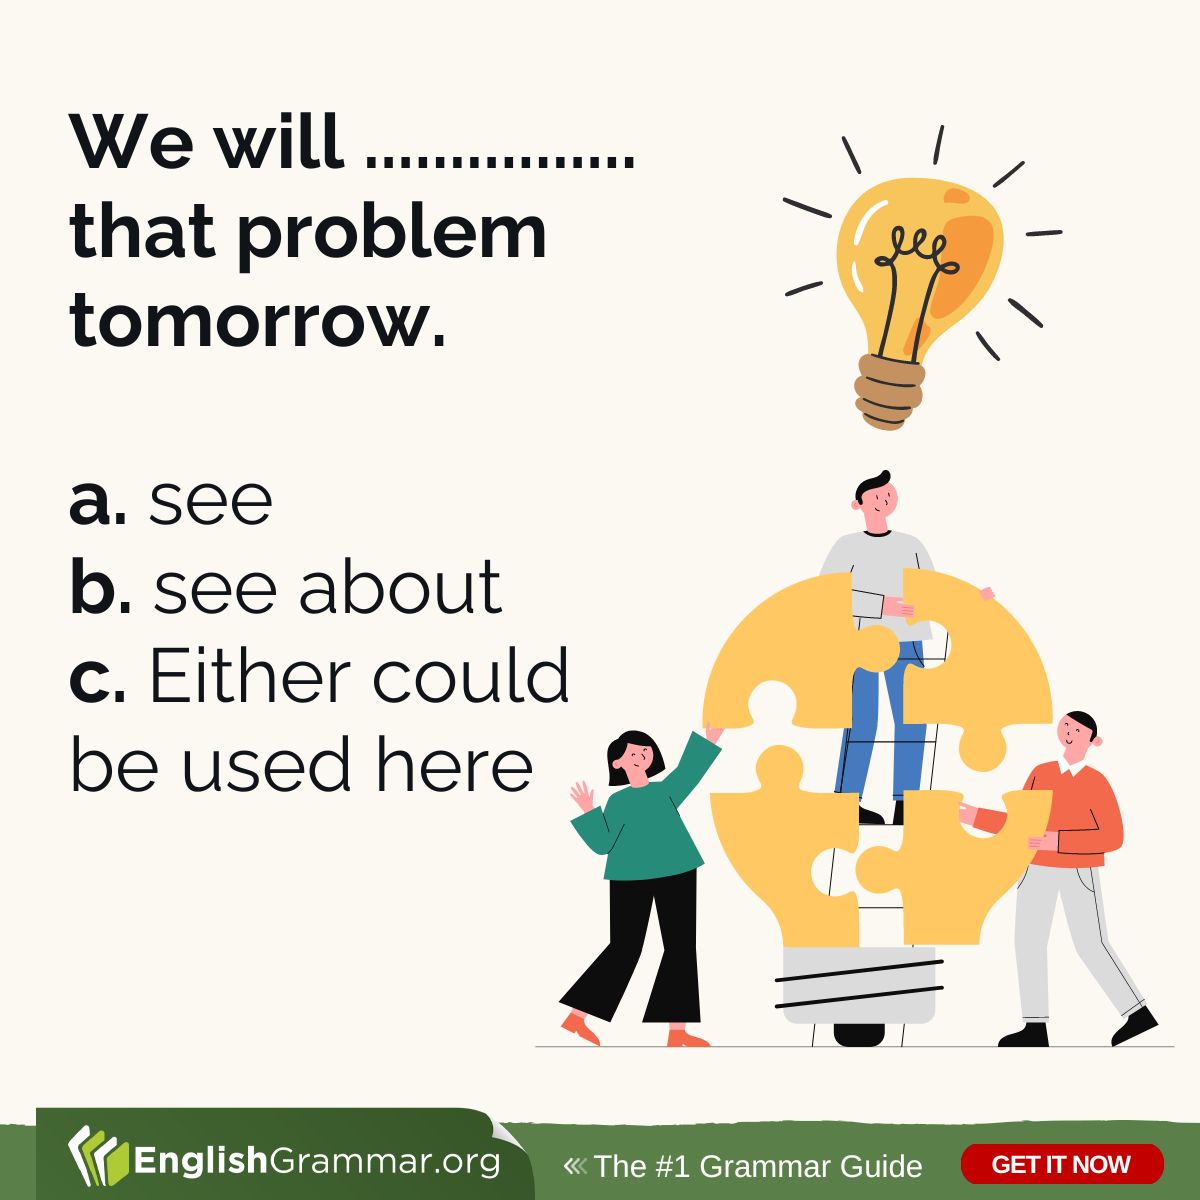 Anyone? Find the right answer here: englishgrammar.org/commonly-confu… #vocabulary #amwriting #writing